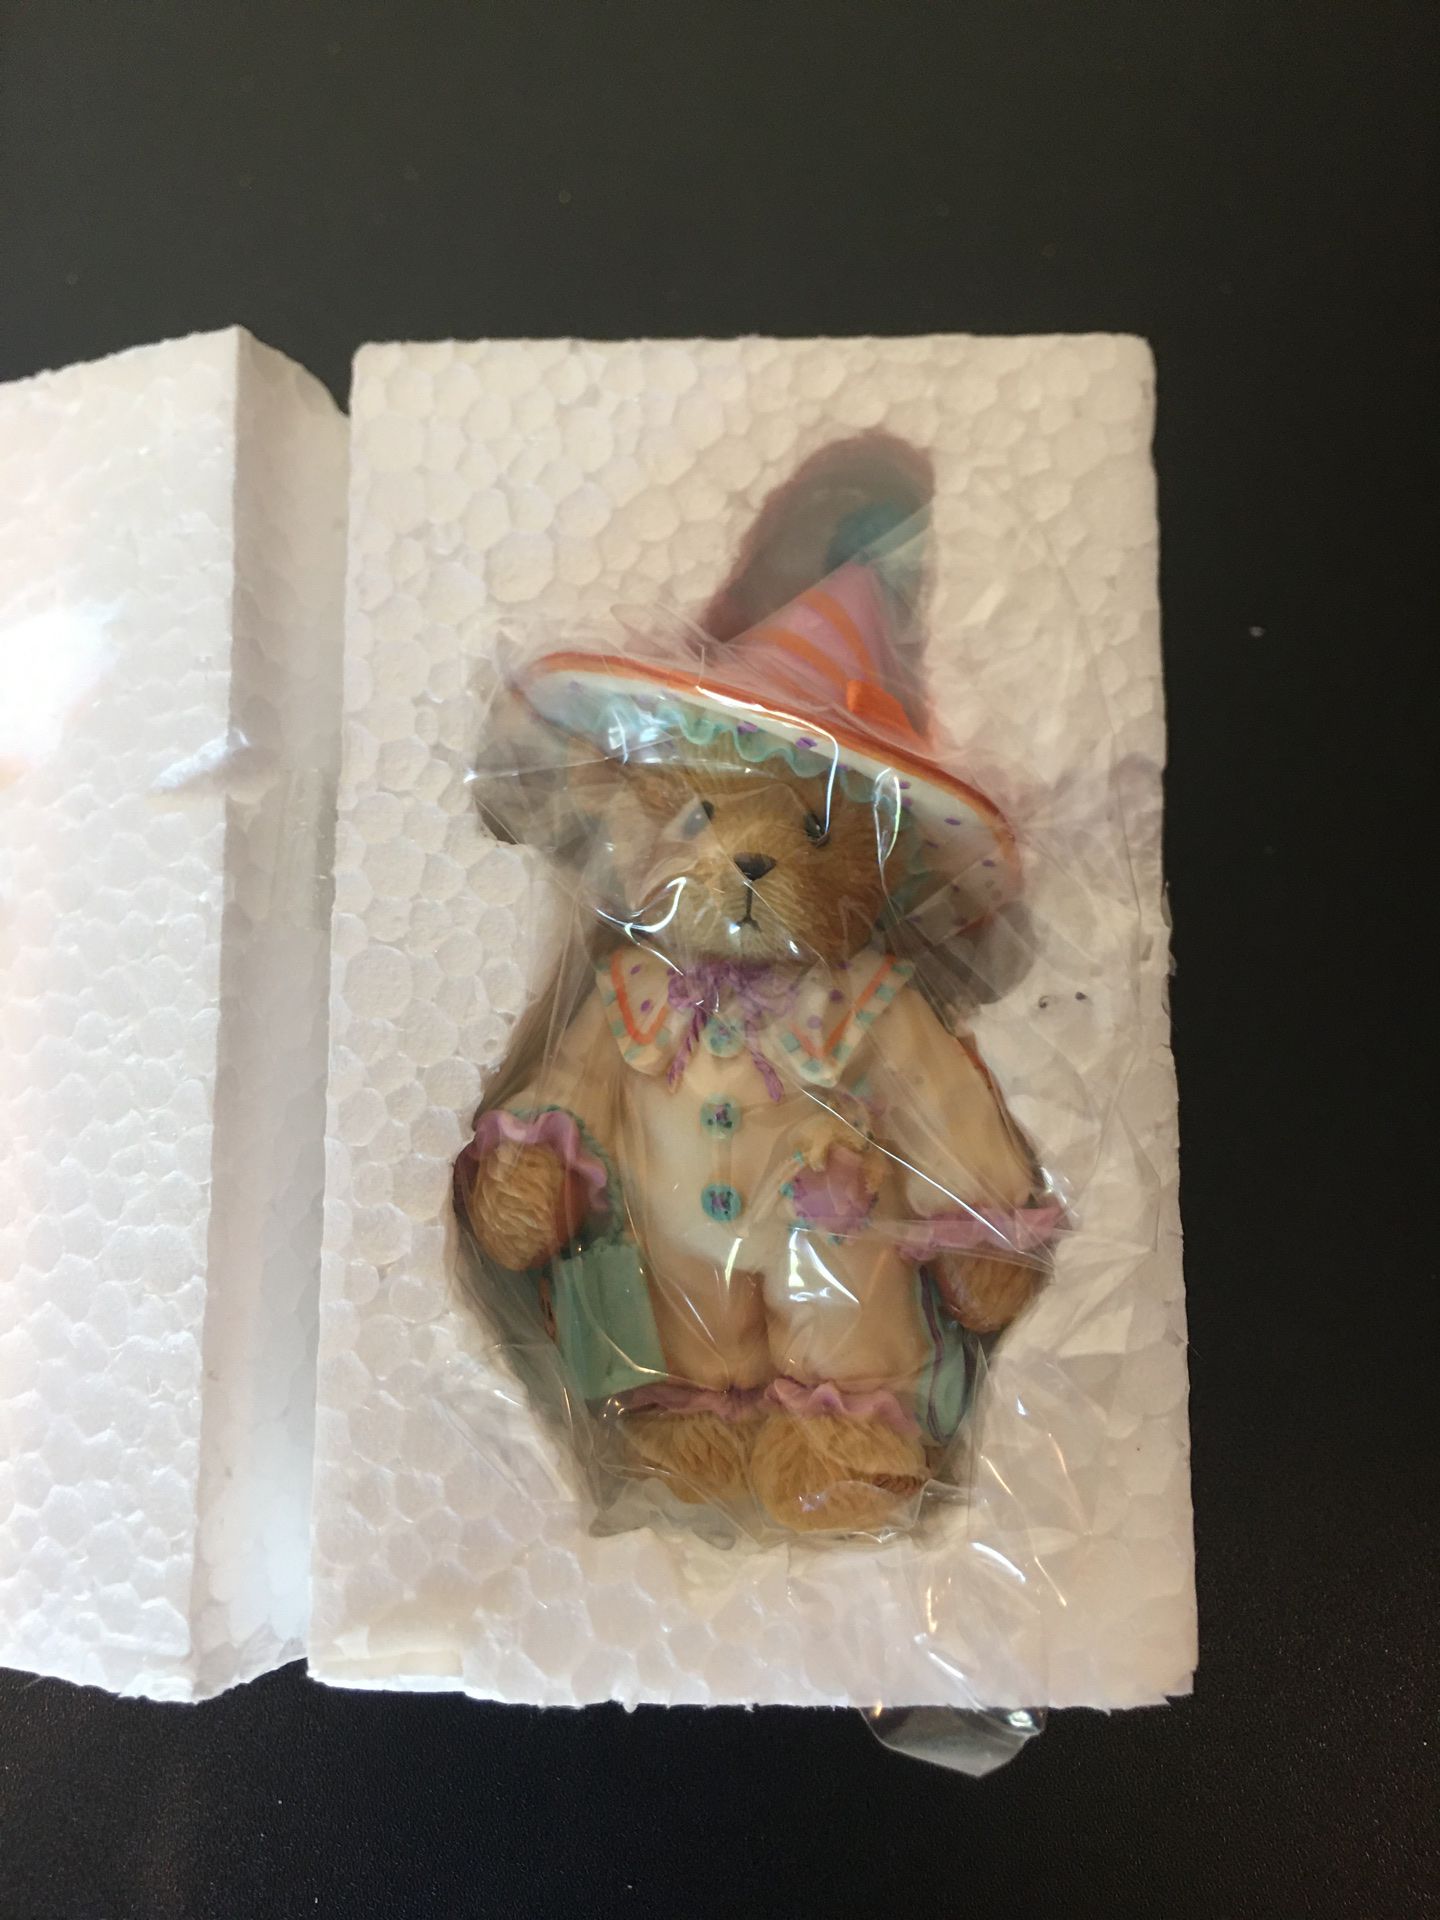 Cherished teddies- you’ve put a spell on my heart